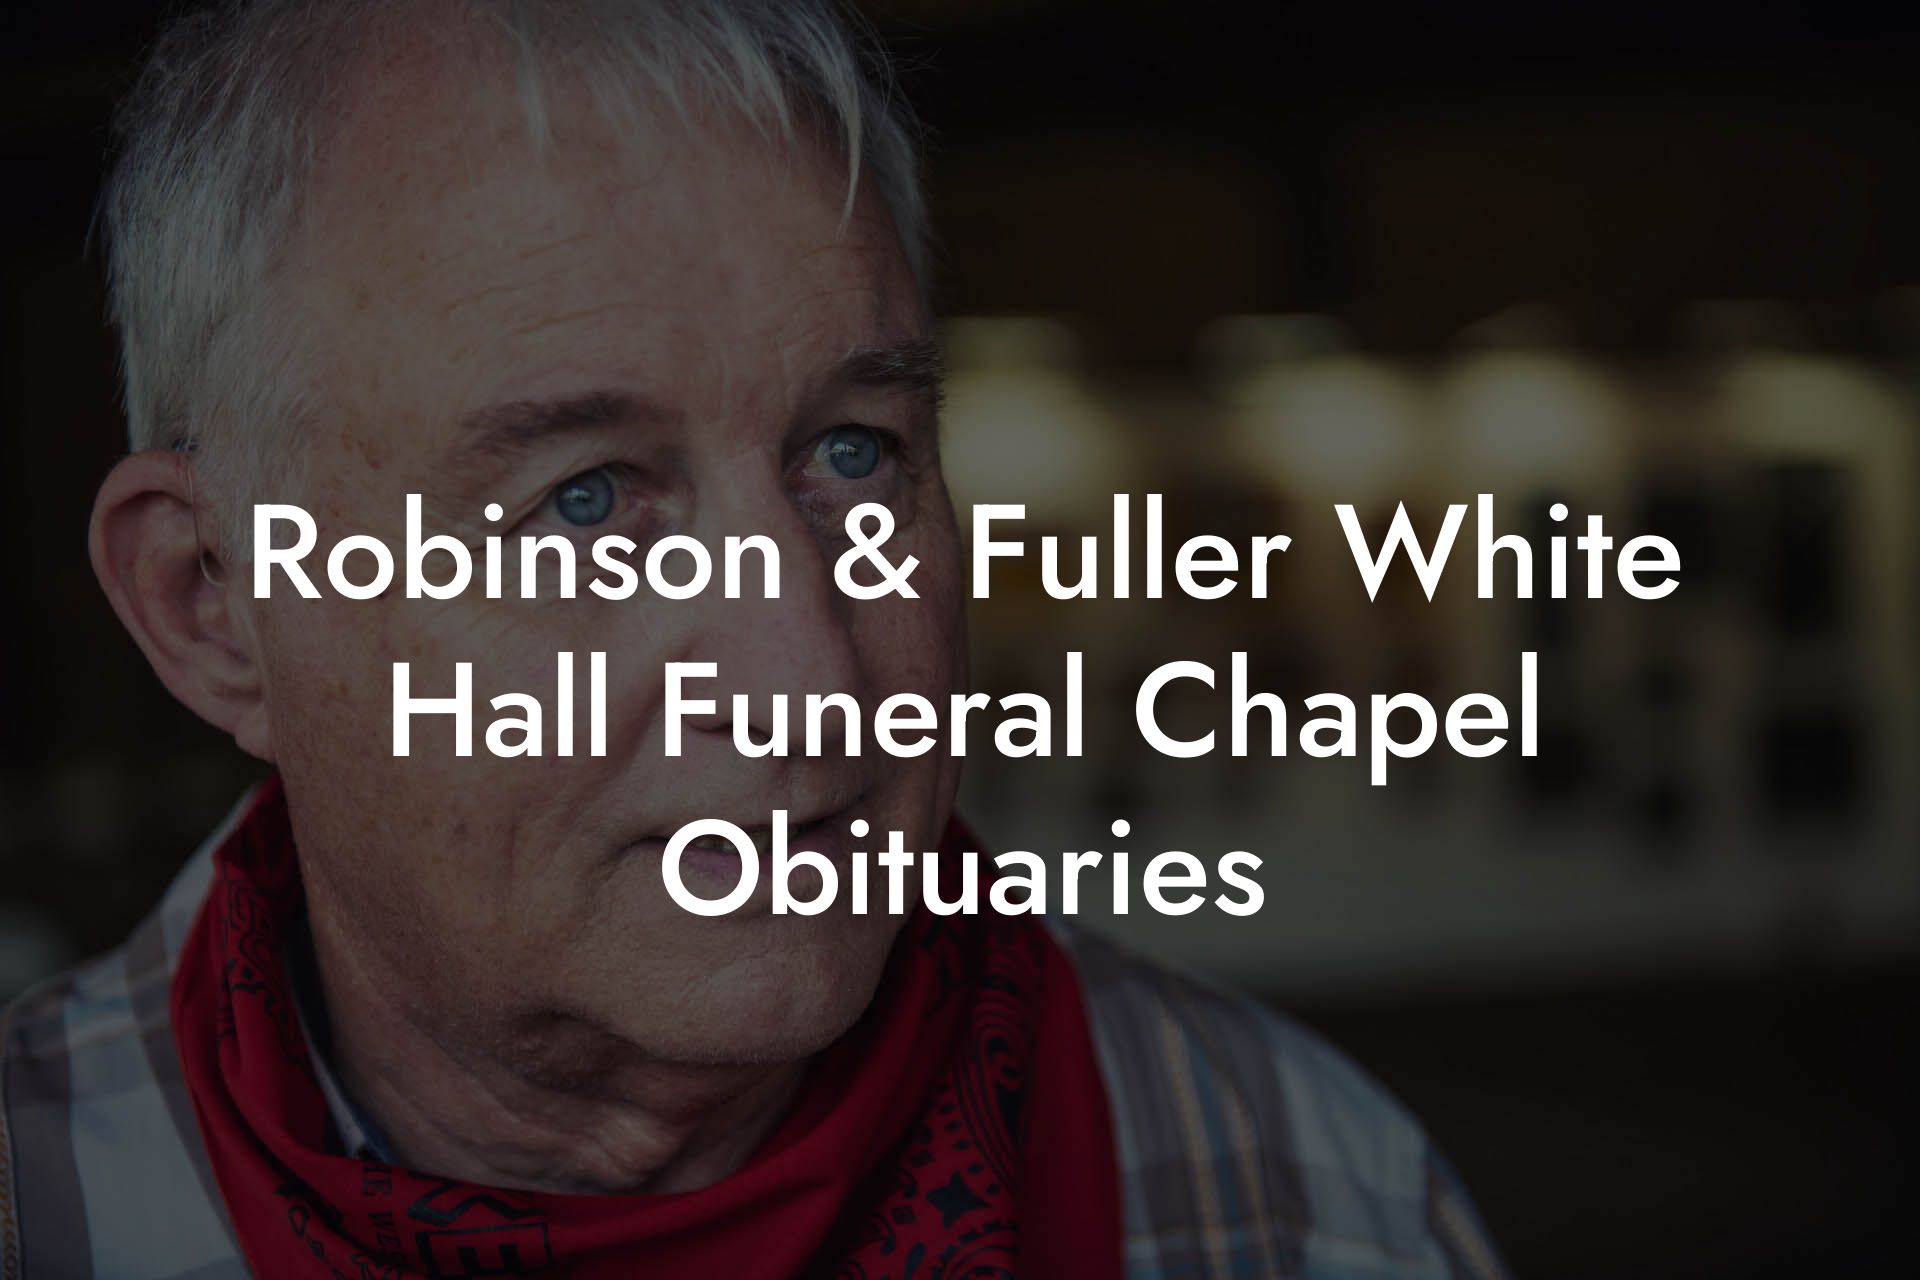 Robinson & Fuller White Hall Funeral Chapel Obituaries